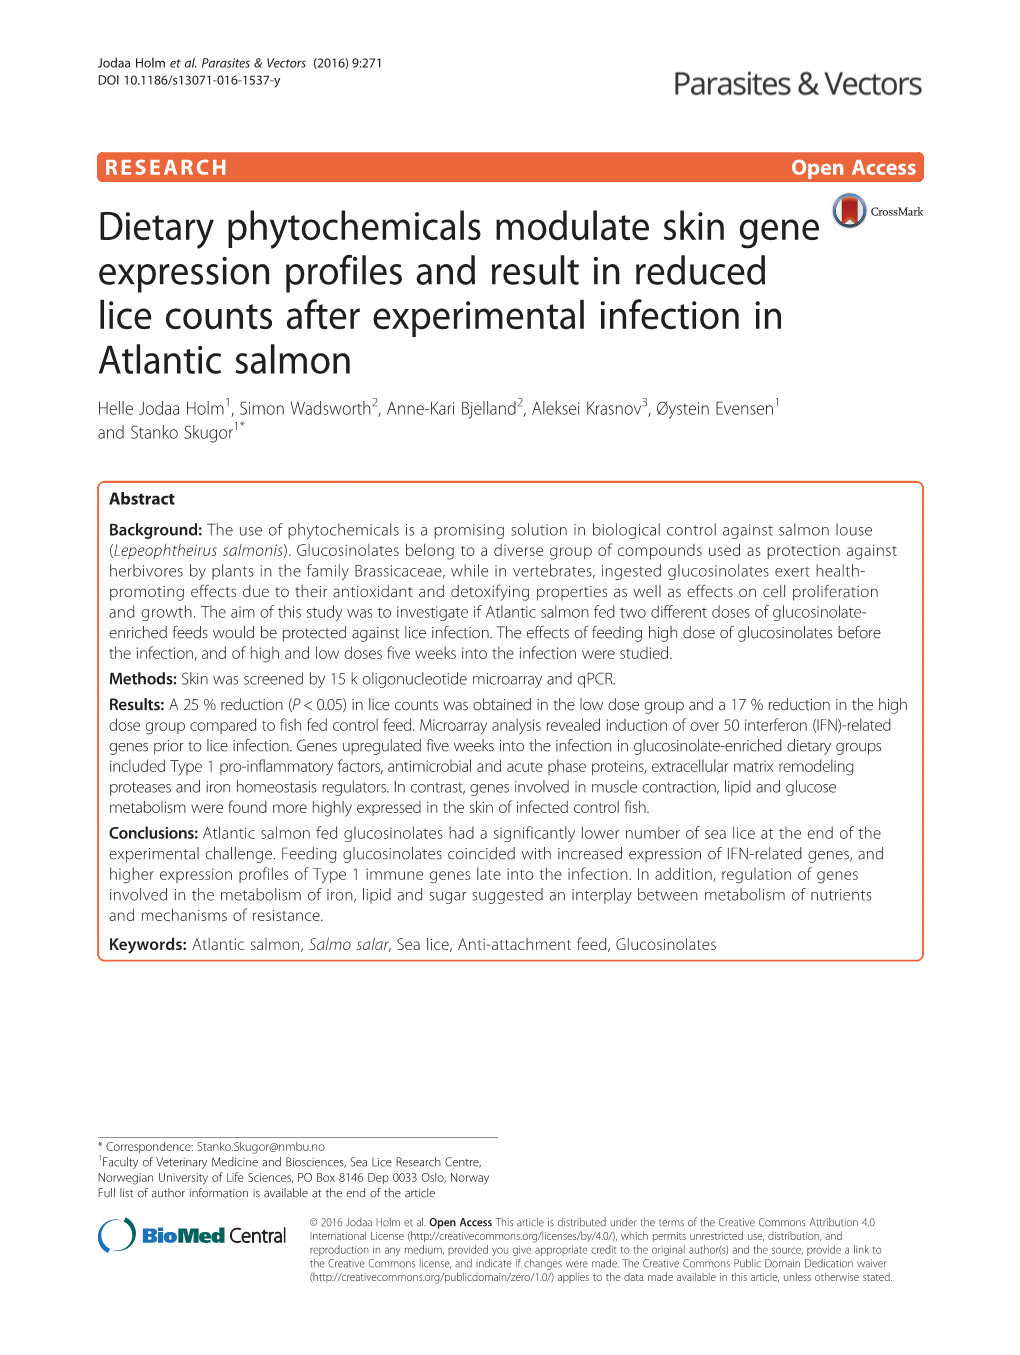 Dietary Phytochemicals Modulate Skin Gene Expression Profiles and Result in Reduced Lice Counts After Experimental Infection In